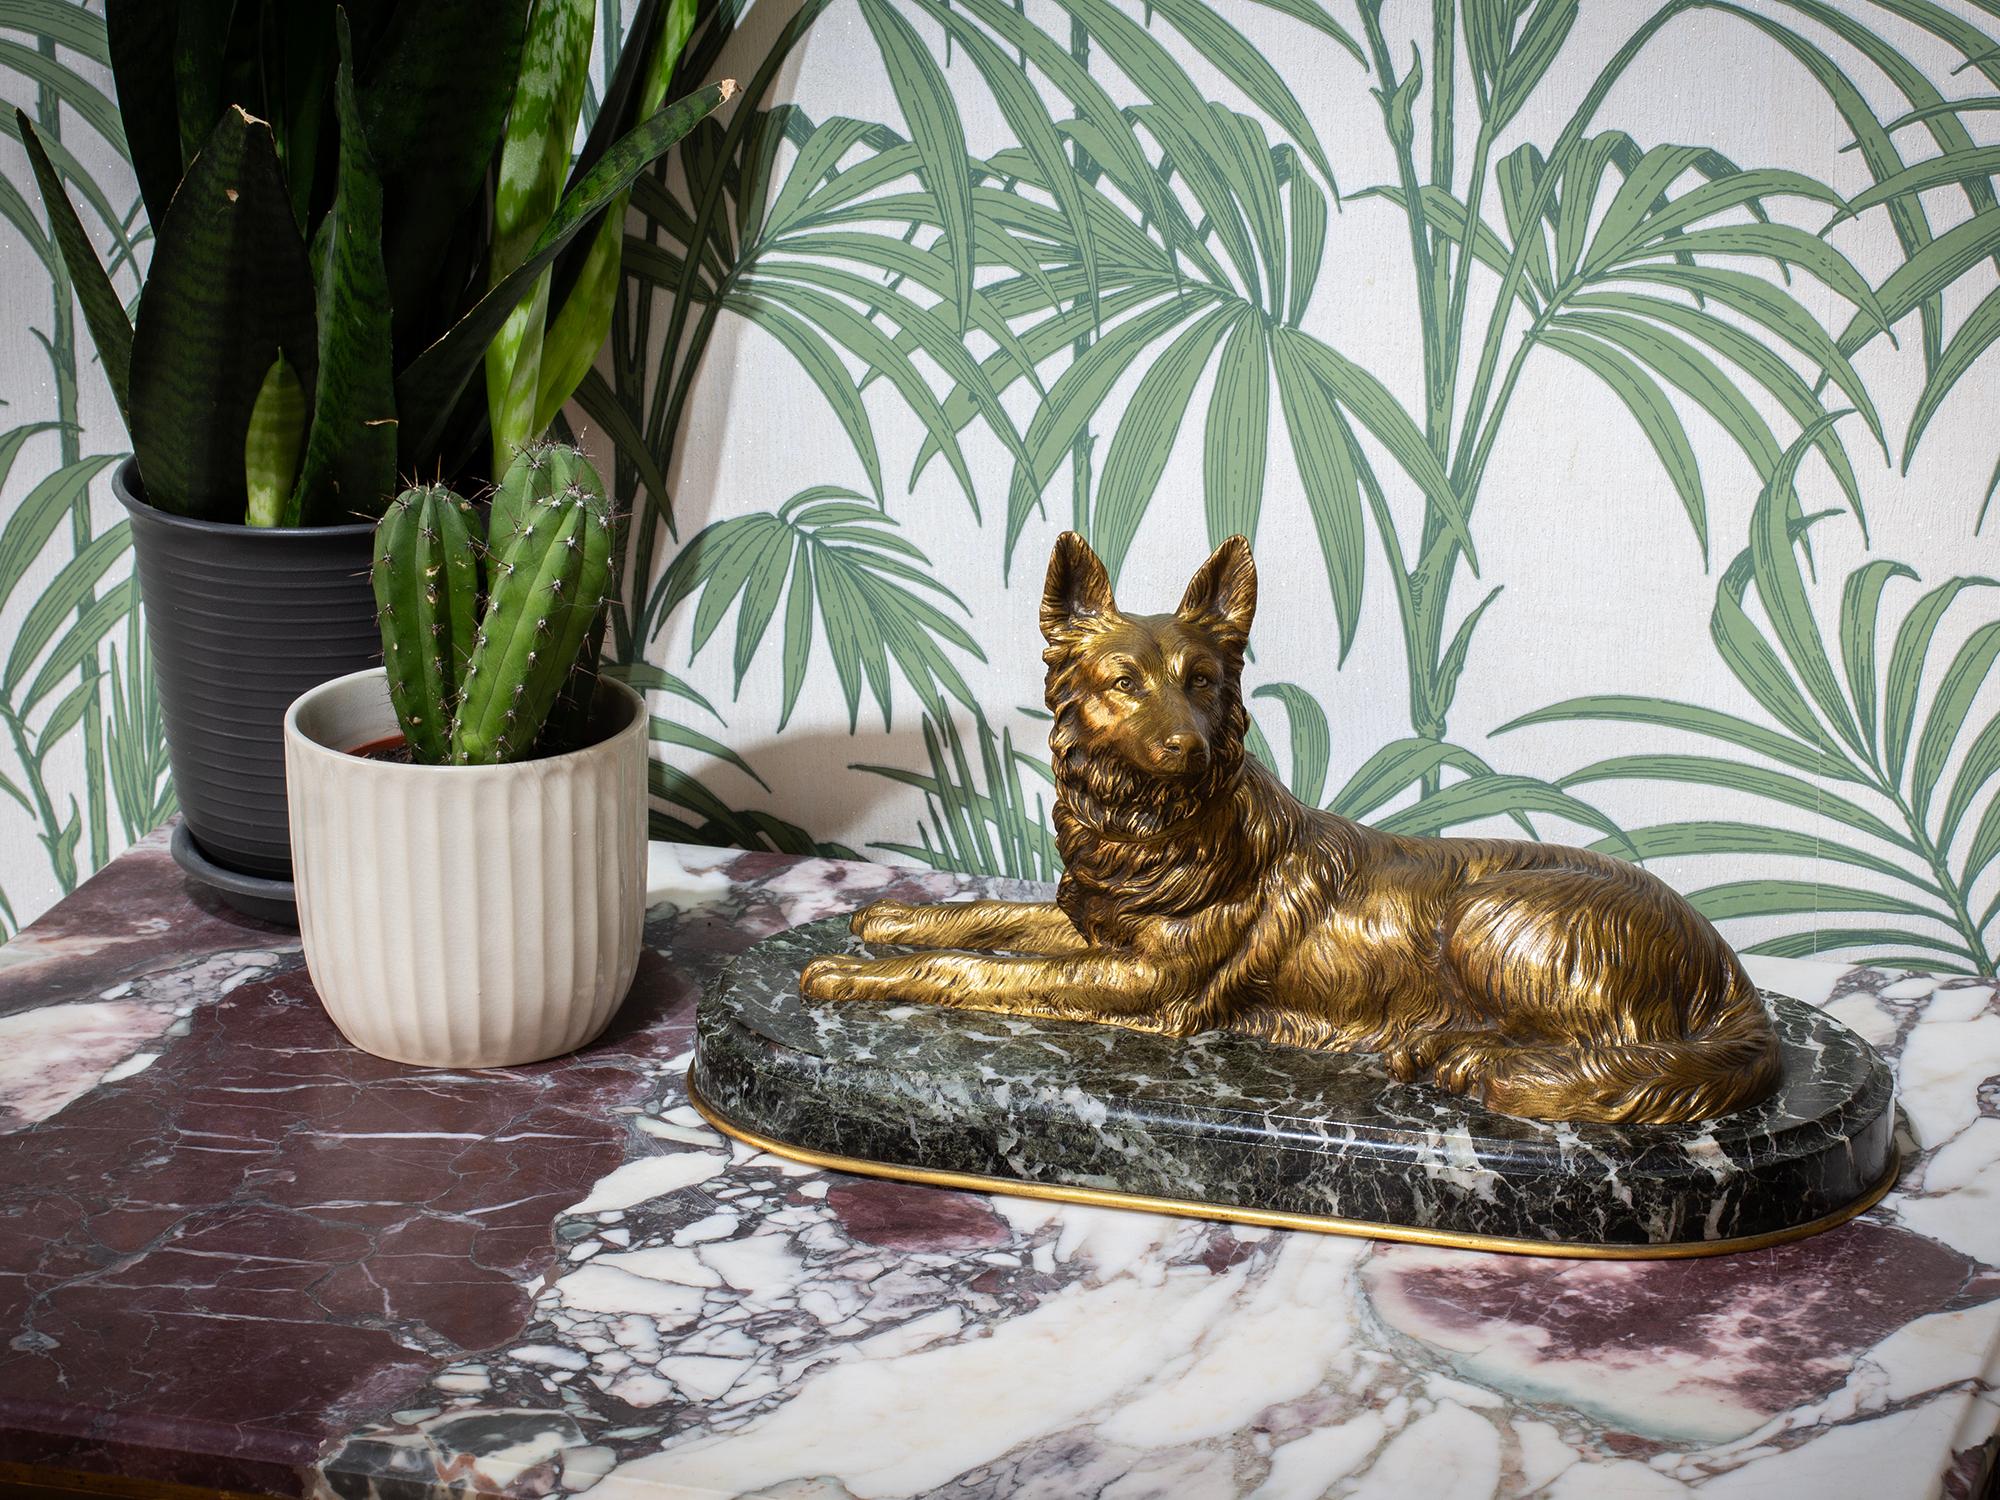 French Bronze Circa 1905 upon a Marble Oval Base

From our Sculpture collection, we are pleased to offer a French Bronze Belgian Shepherd Figure. The figure mounted upon a green marble base with a convex rim and ormolu border. The bronze cast as a